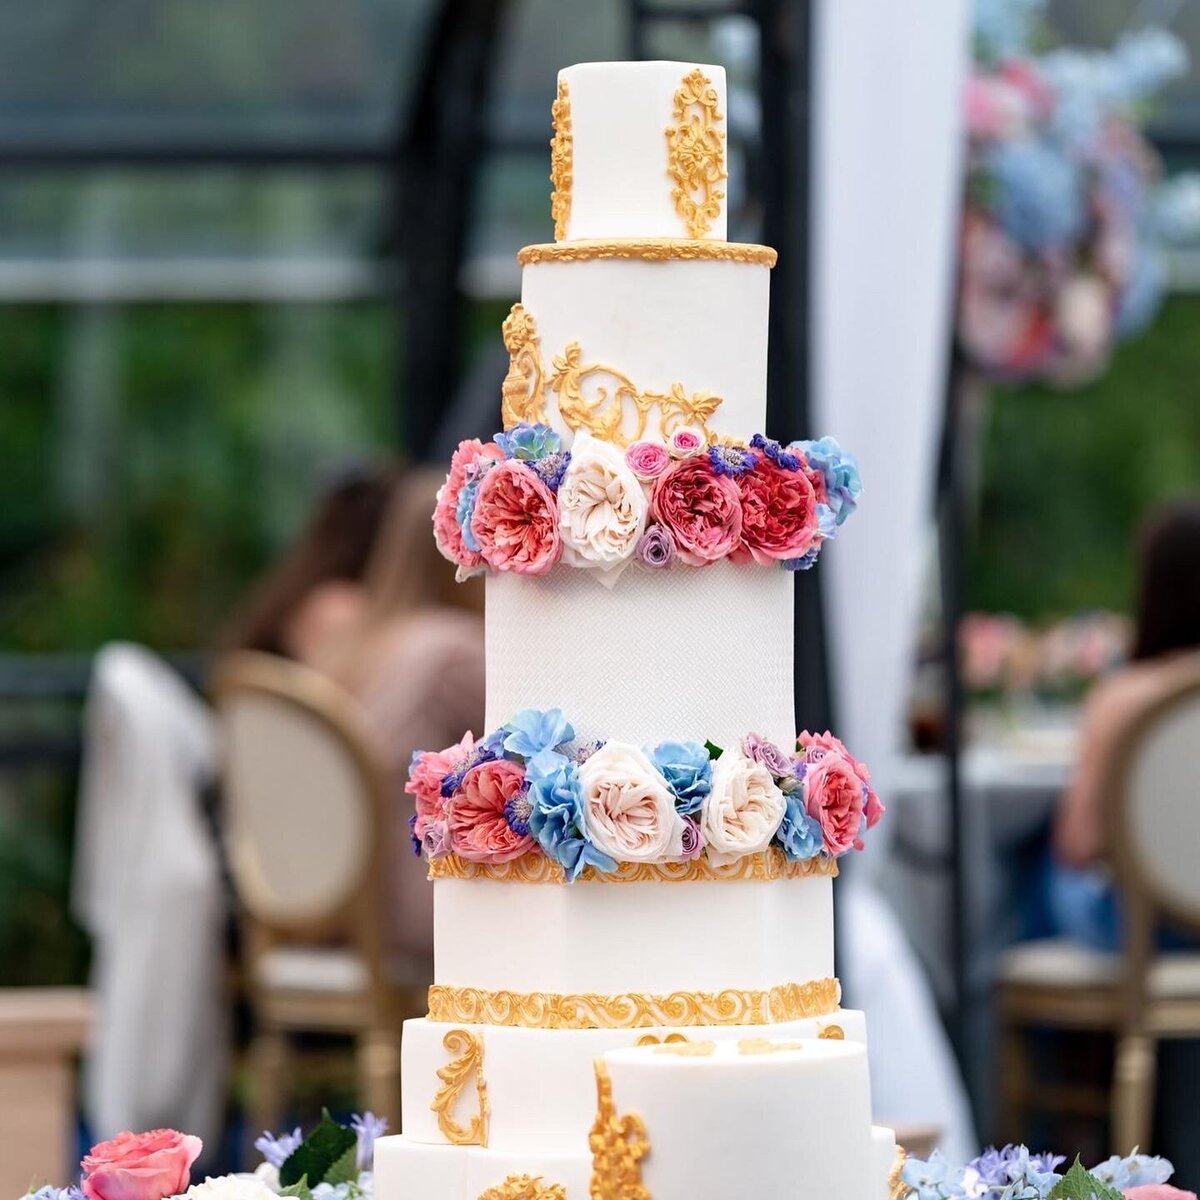 White and gold wedding cake with fresh flowers